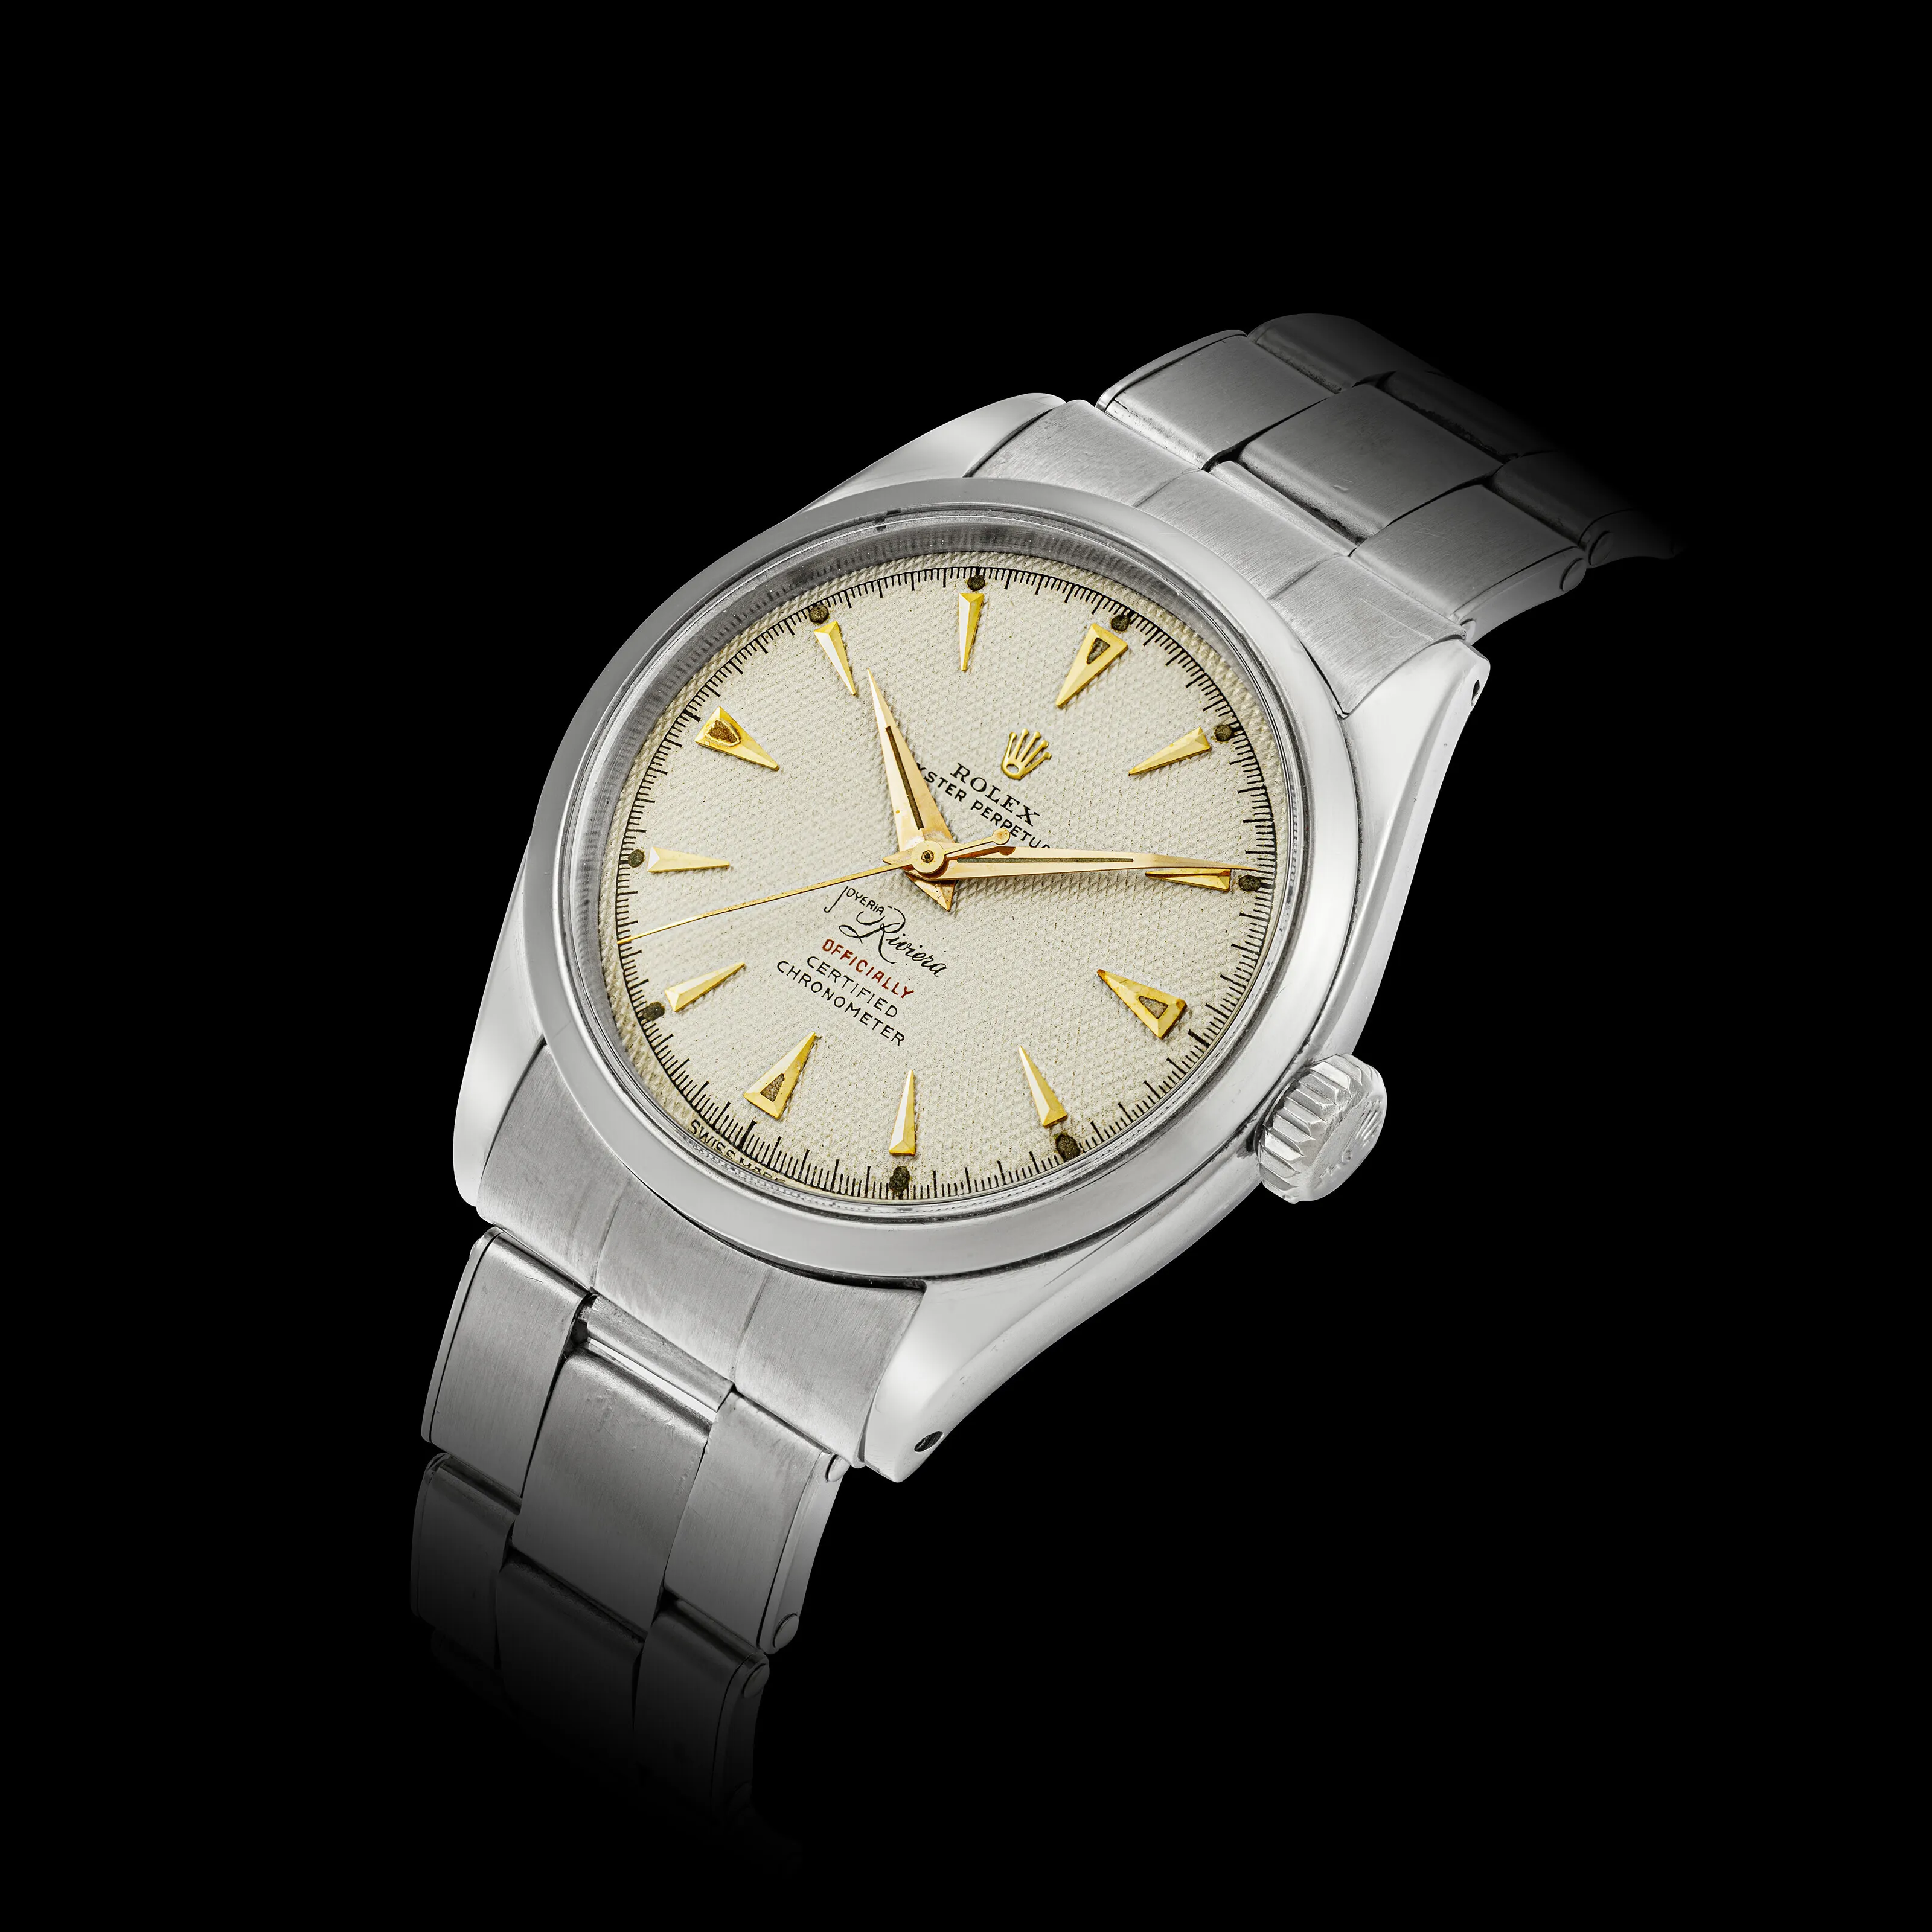 Rolex Oyster Perpetual 34 6284 nullmm